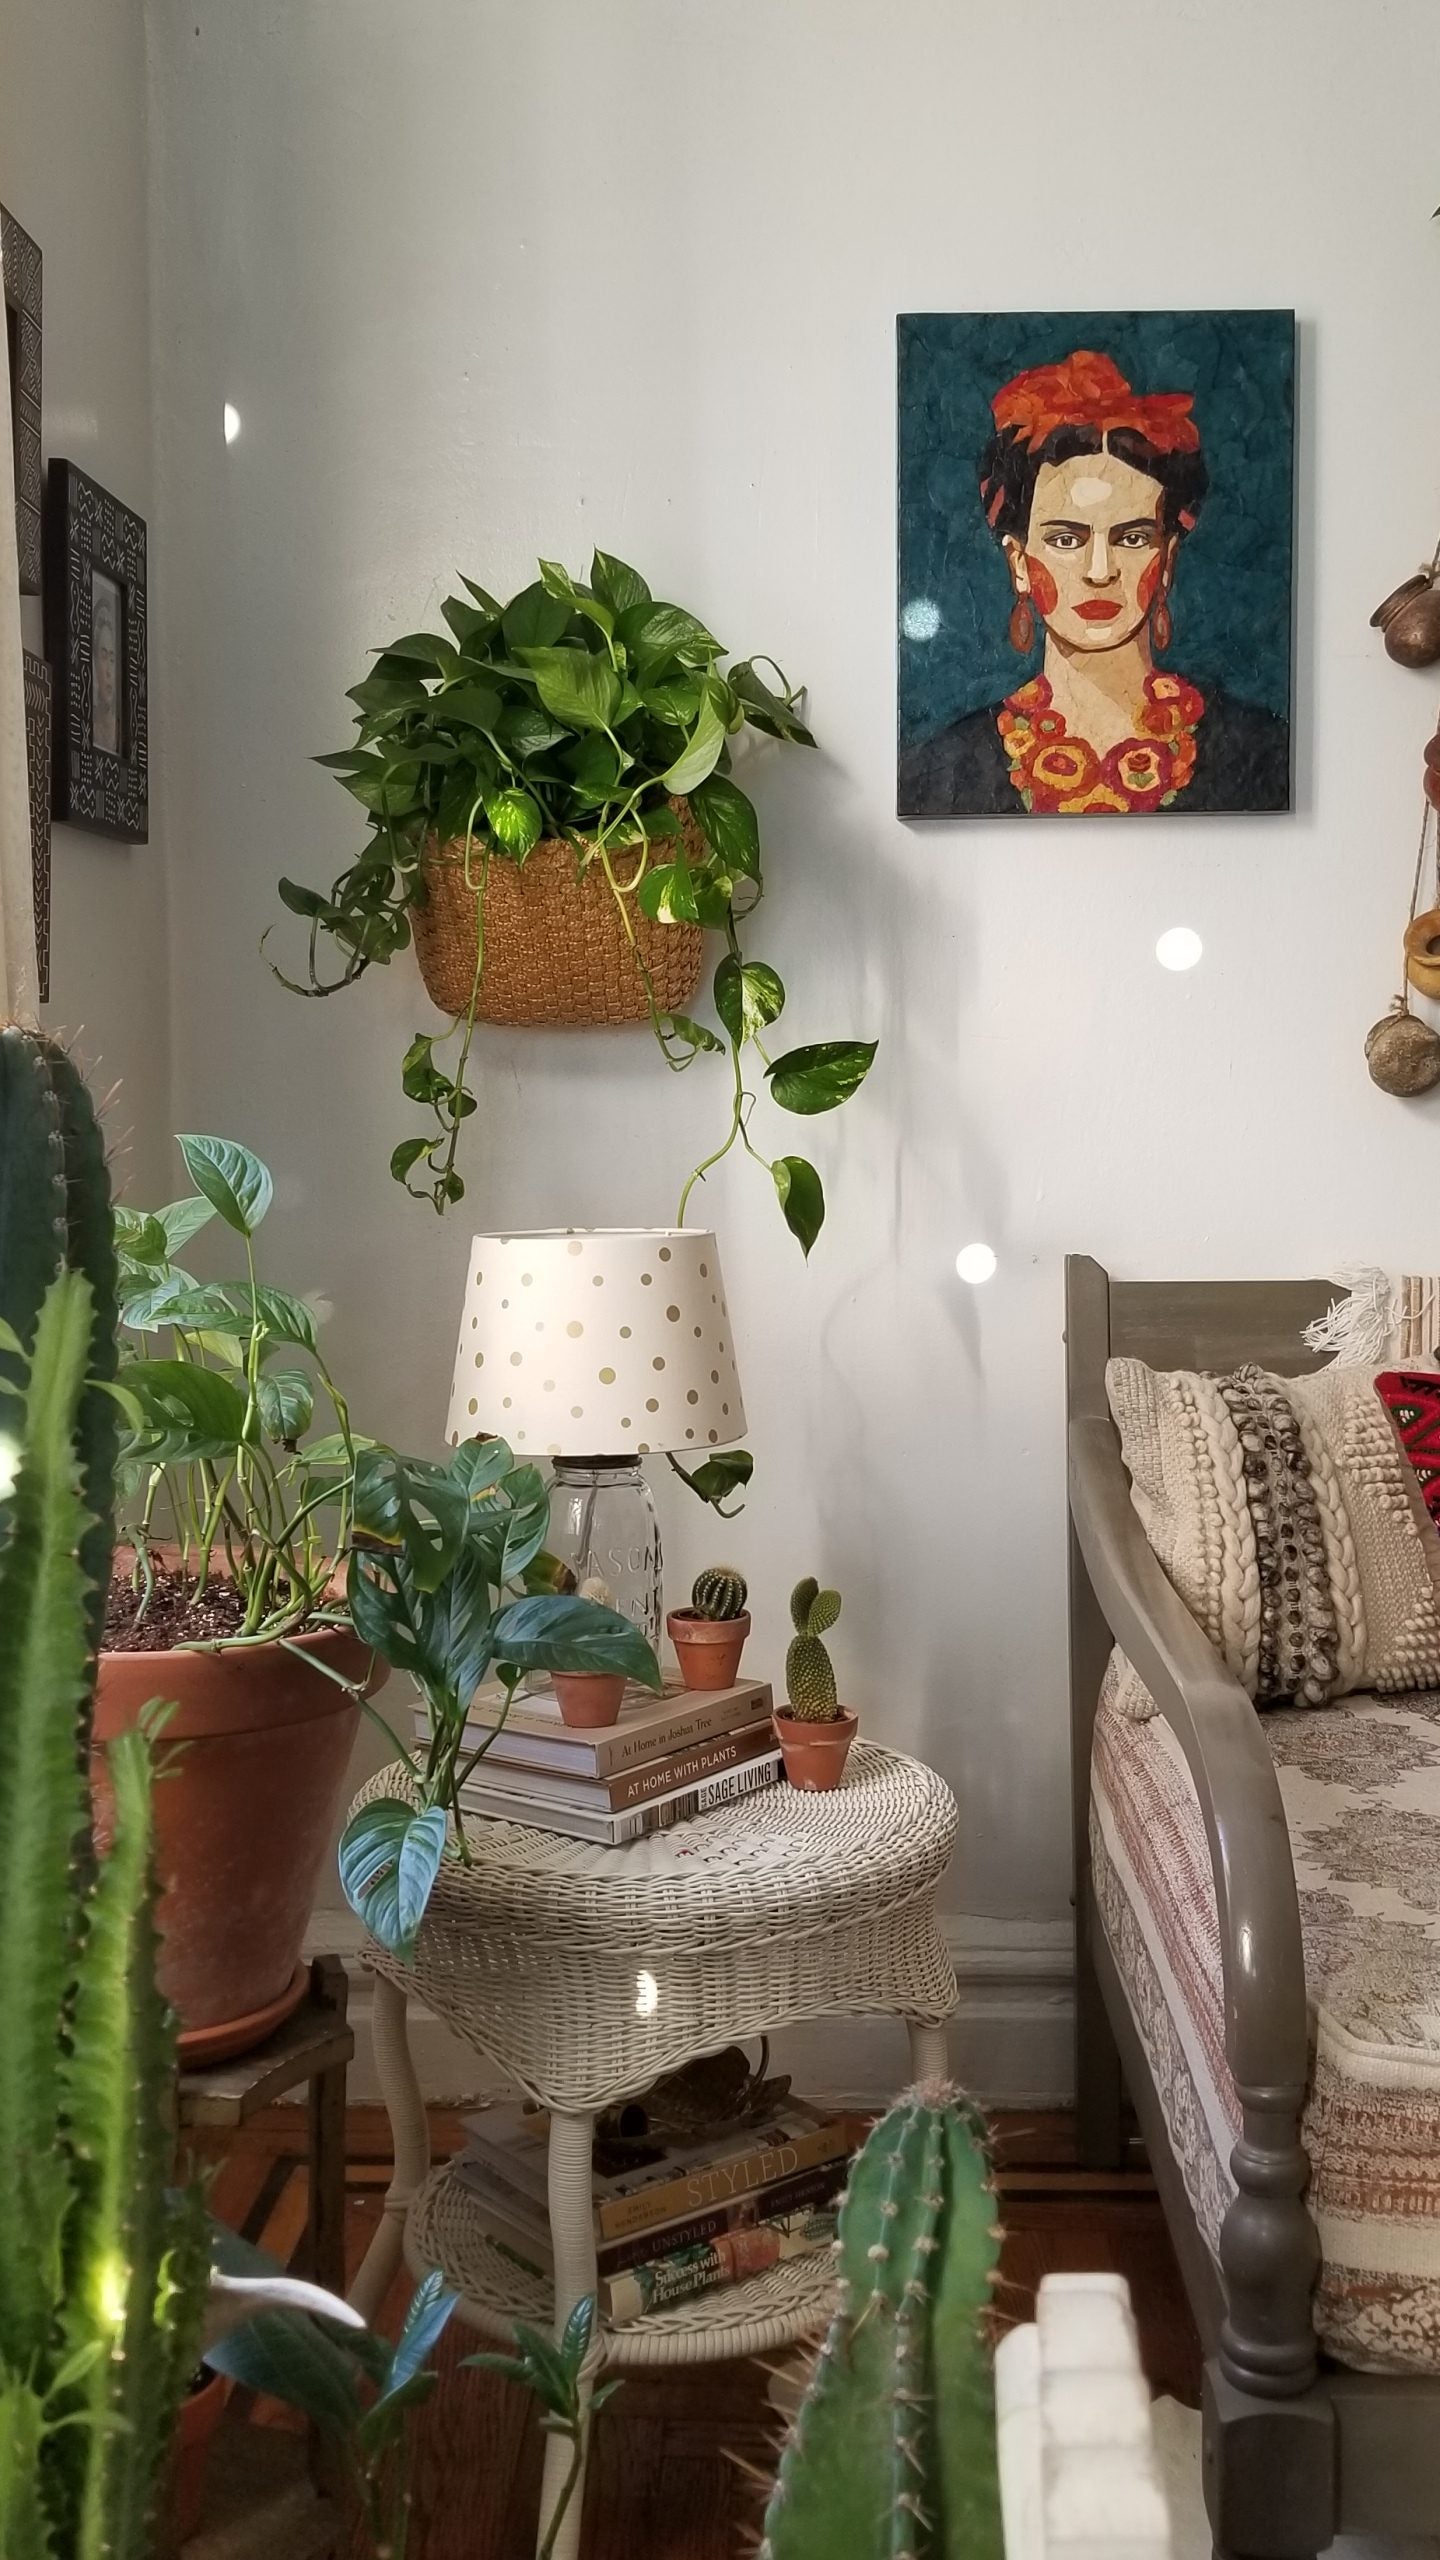 Corner with lamp, art, and plants